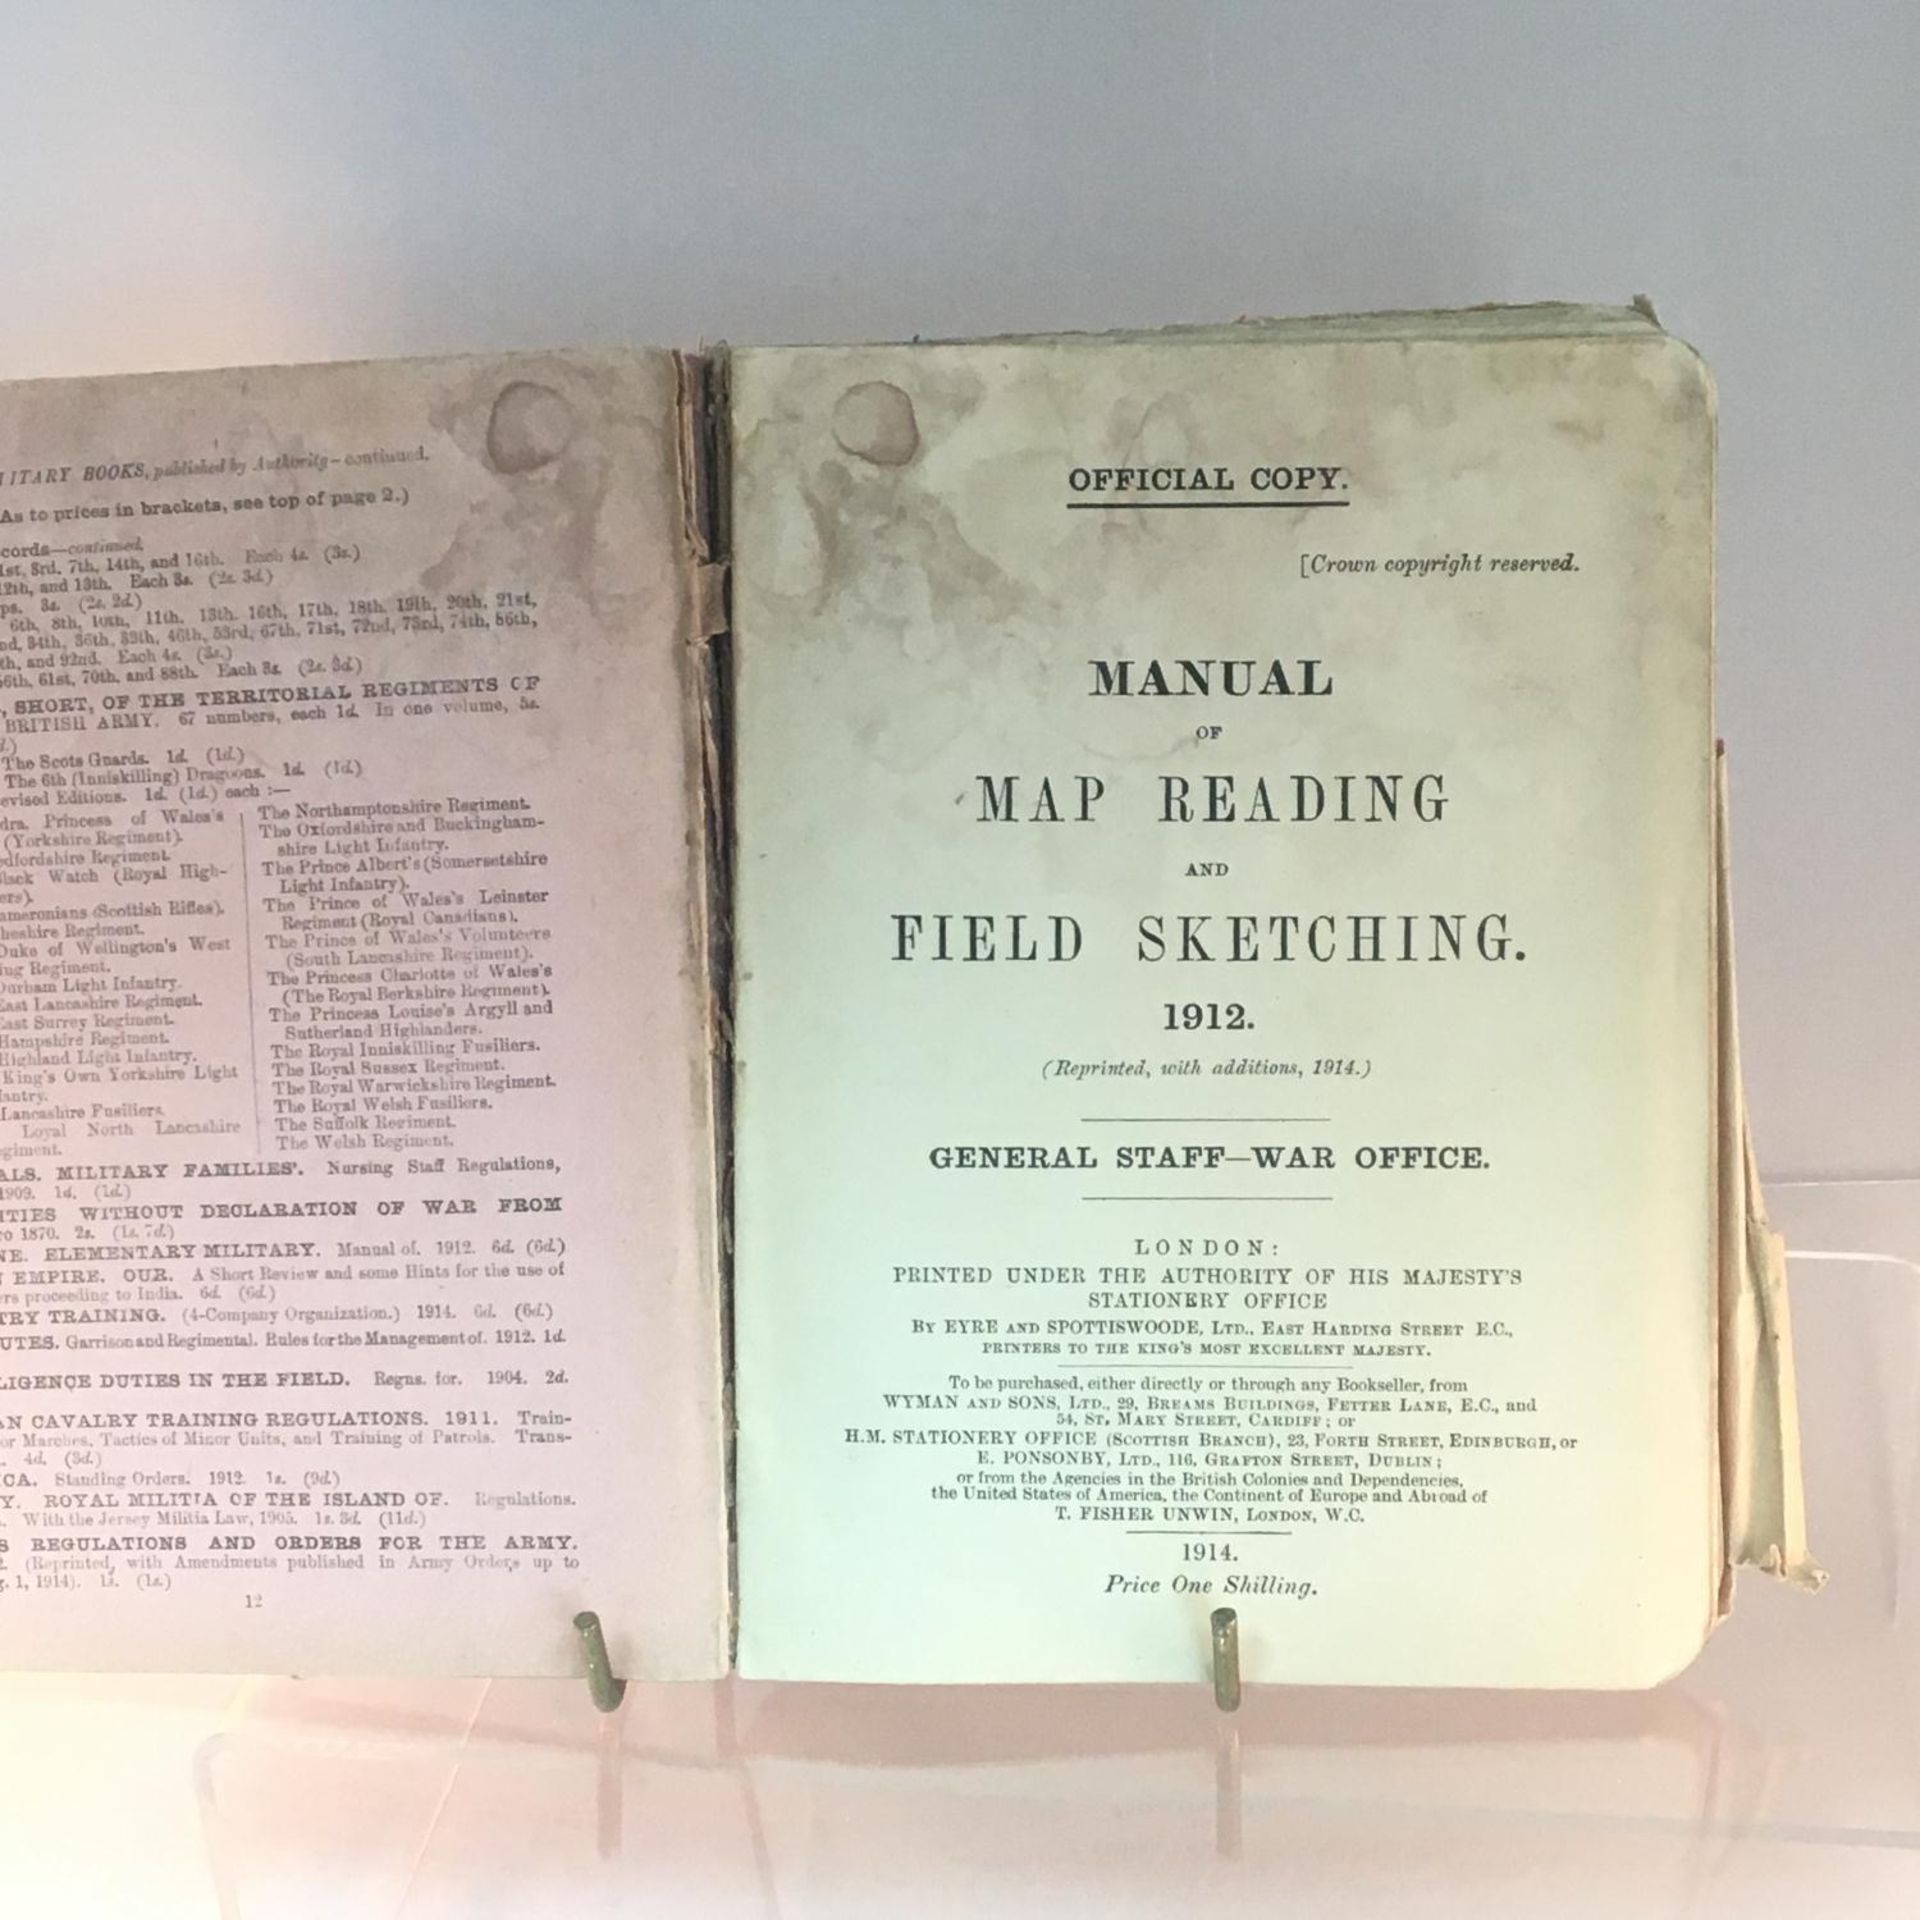 WW1 Official War Office Copy, Manual of Map Reading and Field Sketching 1912. 1914 edition, issued